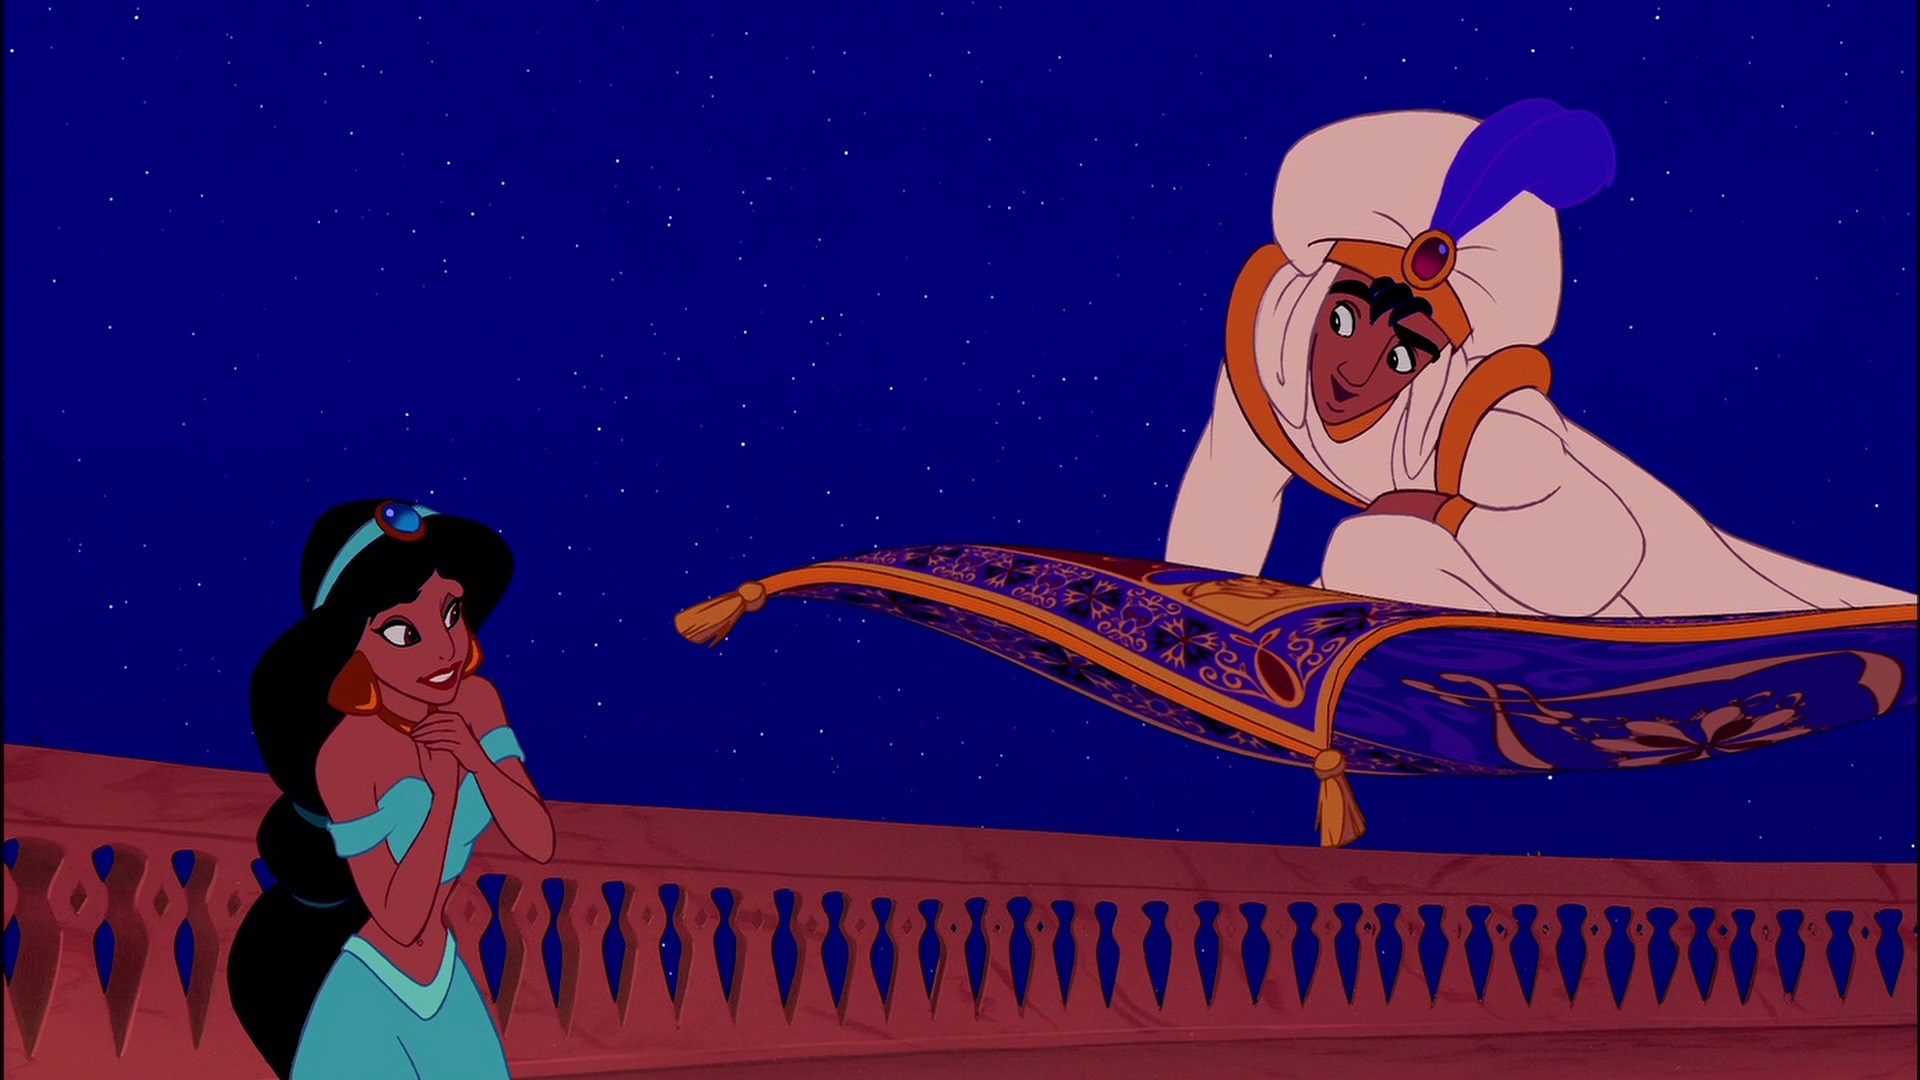 Aladdin Pt 3: Free at last! A 'Whole New World' awaits. - Blog - The Film  Experience